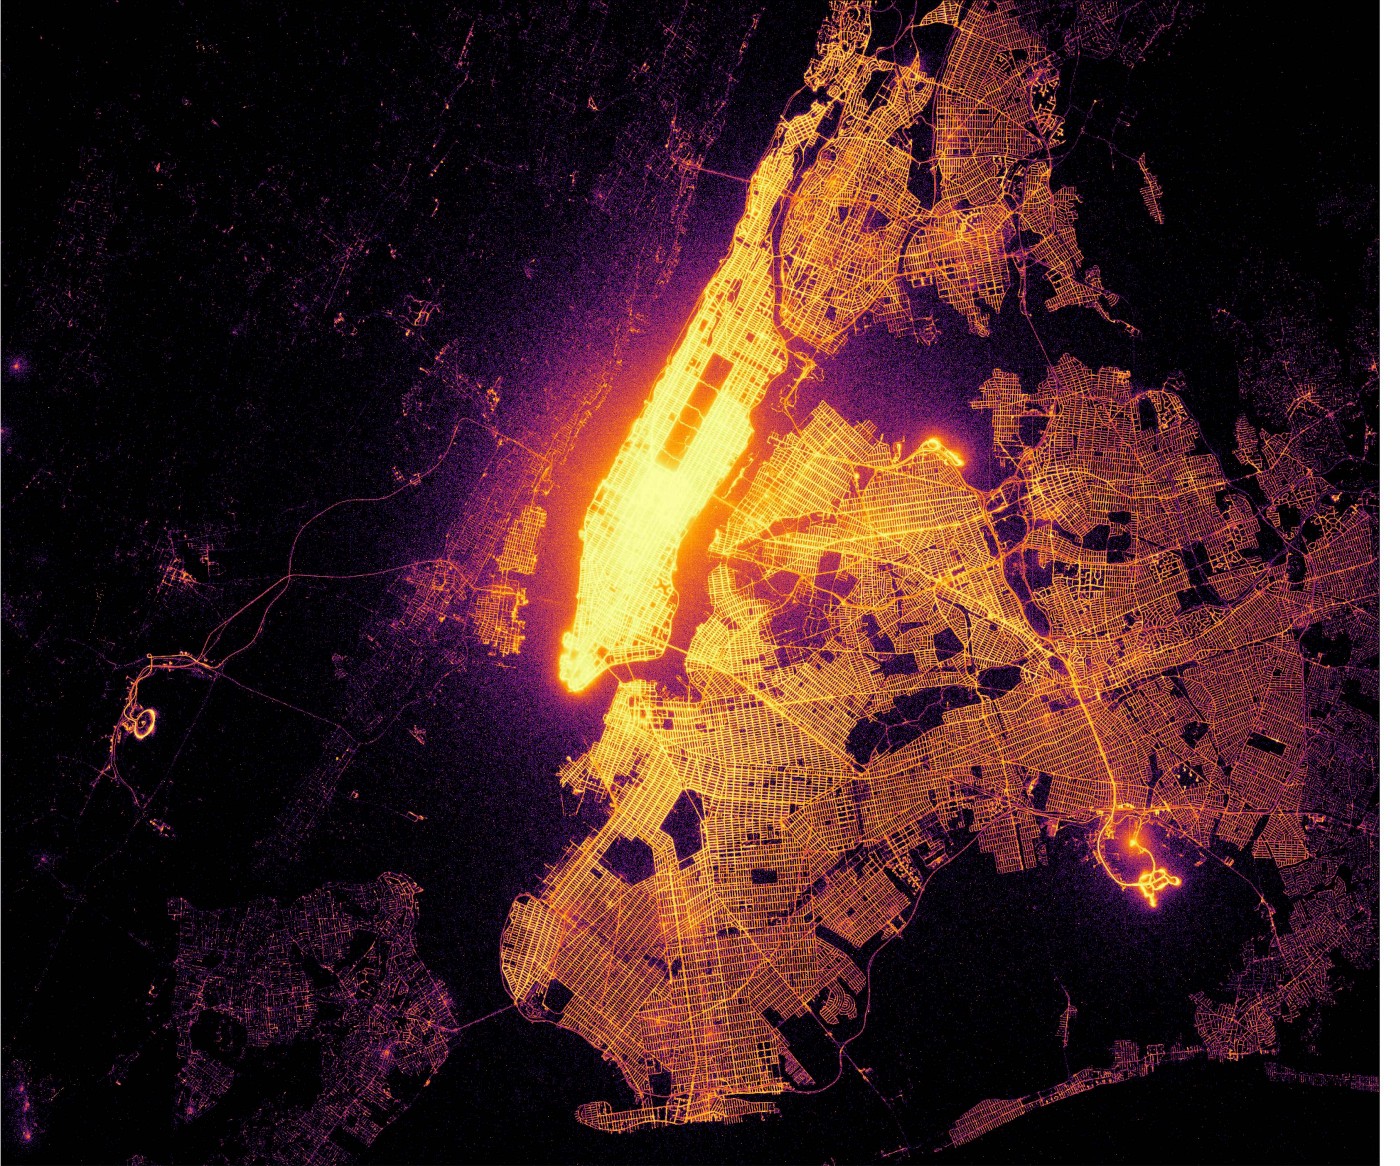 If taxi trips were fireflies. 1.3 billion NYC taxi trips were plotted to create this stunning map. Credit: https://towardsdatascience.com/if-taxi-trips-were-fireflies-1-3-billion-nyc-taxi-trips-plotted-b34e89f96cfa